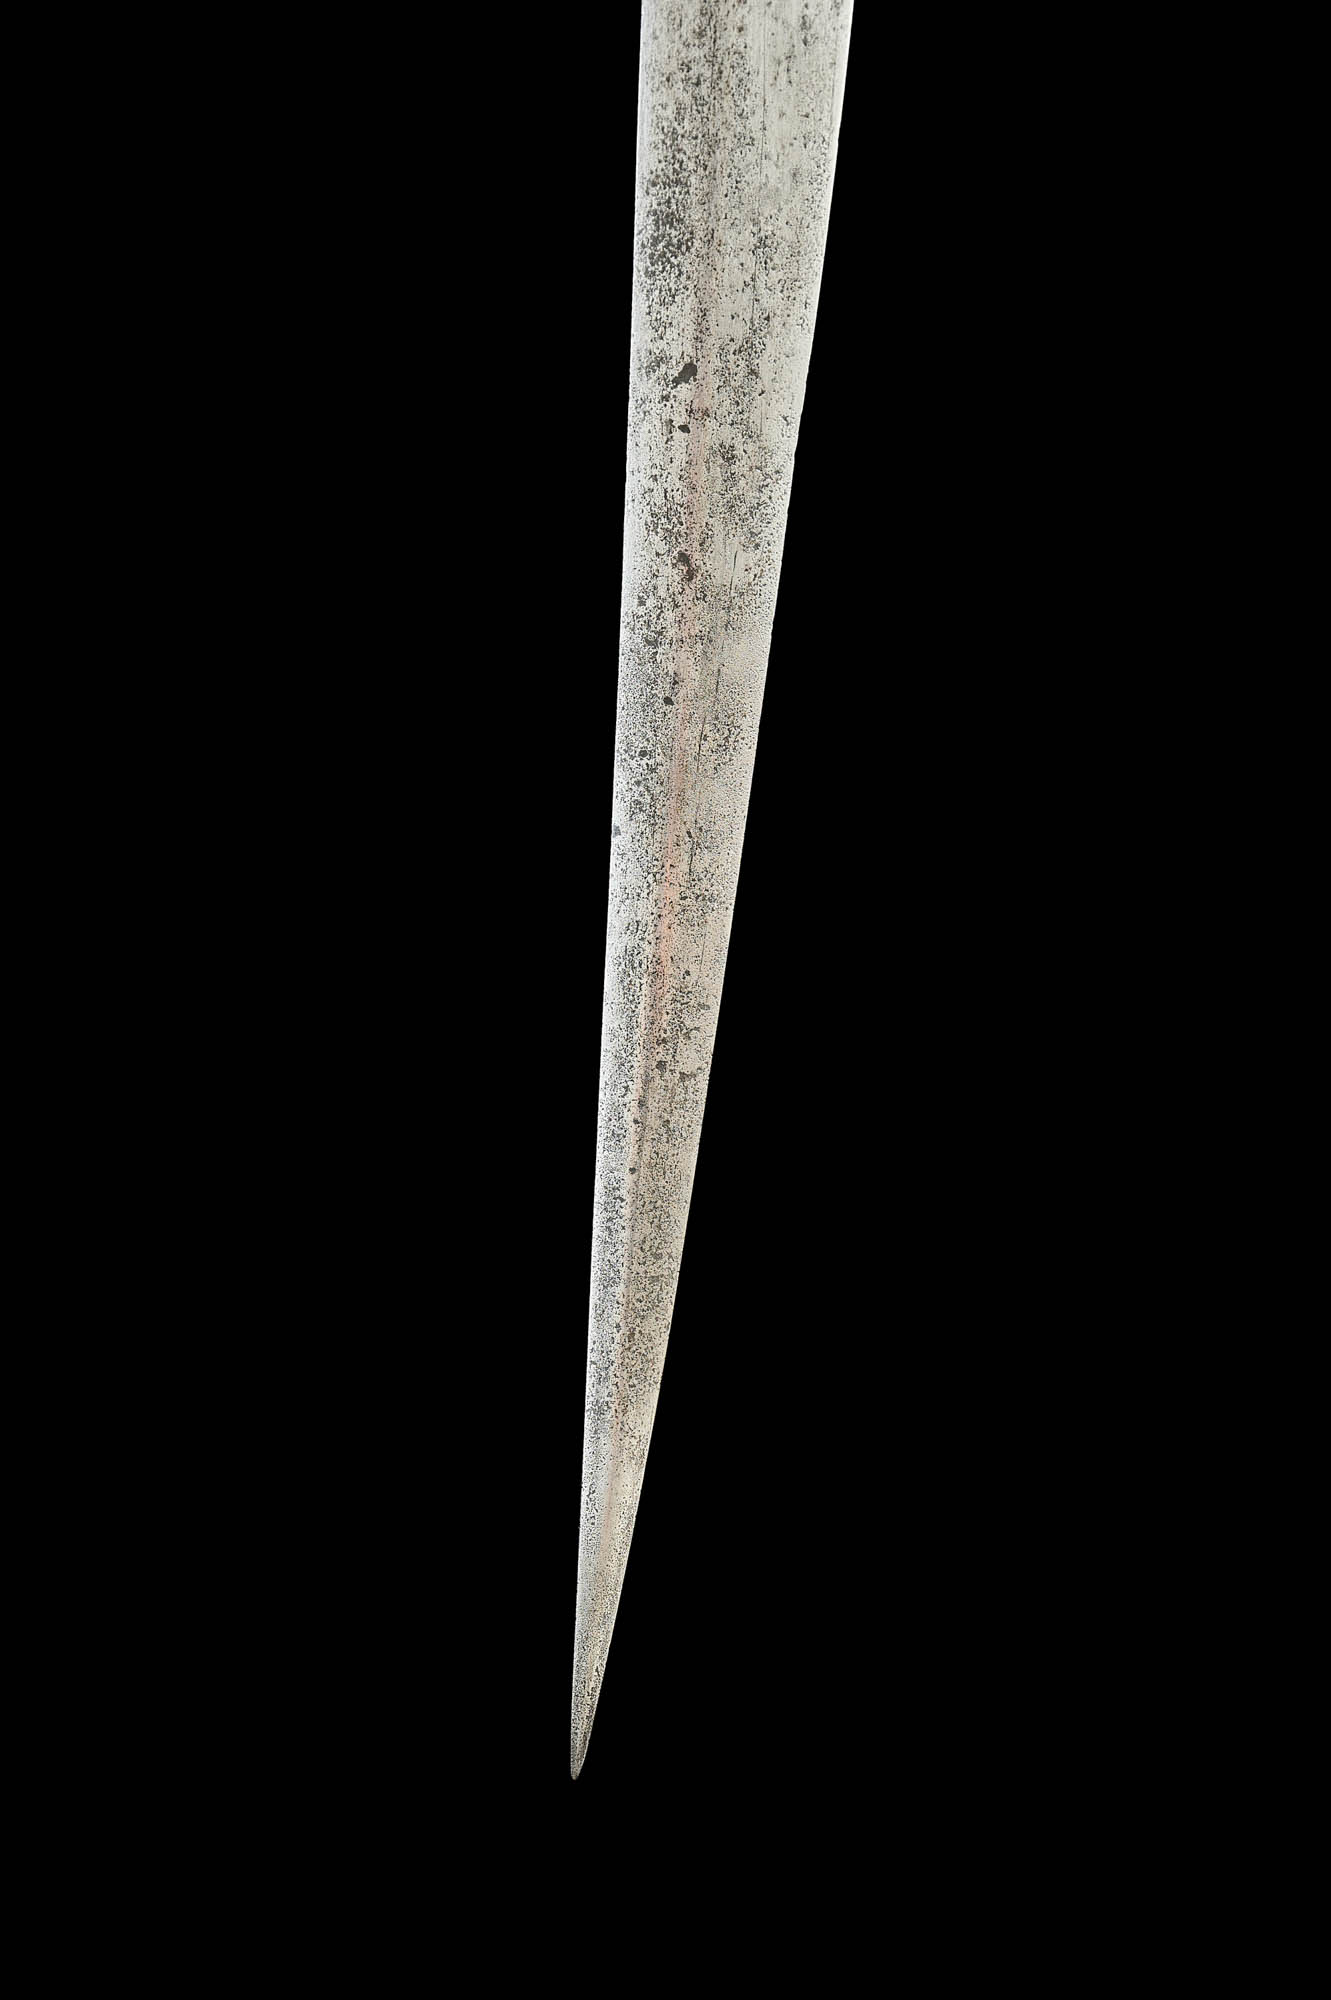 TATAR SABER SWORD DECORATED WITH RHOMBS - Image 18 of 21